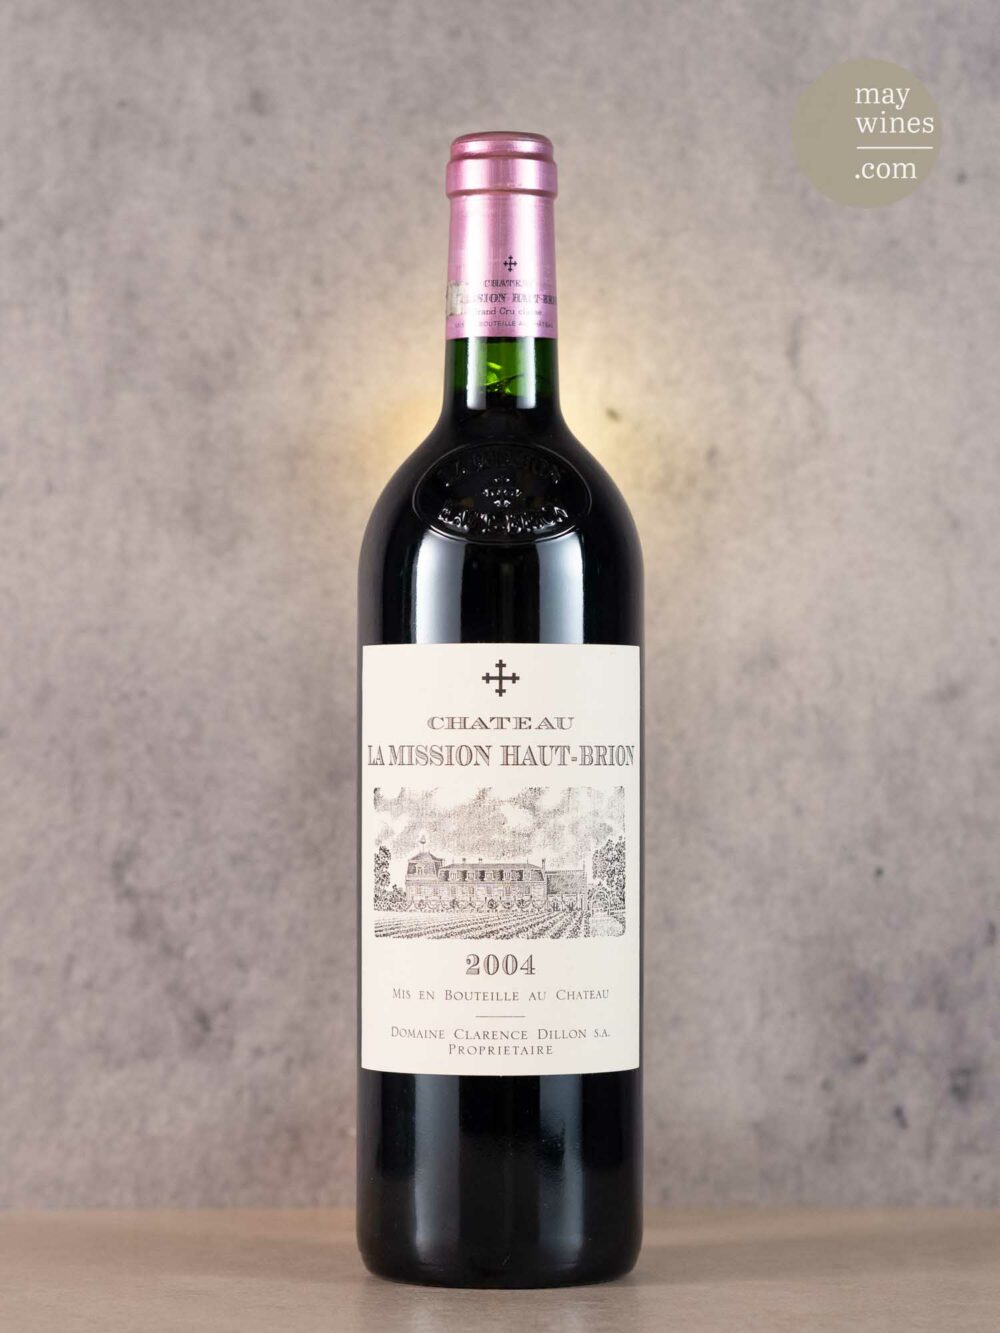 May Wines – Rotwein – 2004 Château La Mission Haut-Brion